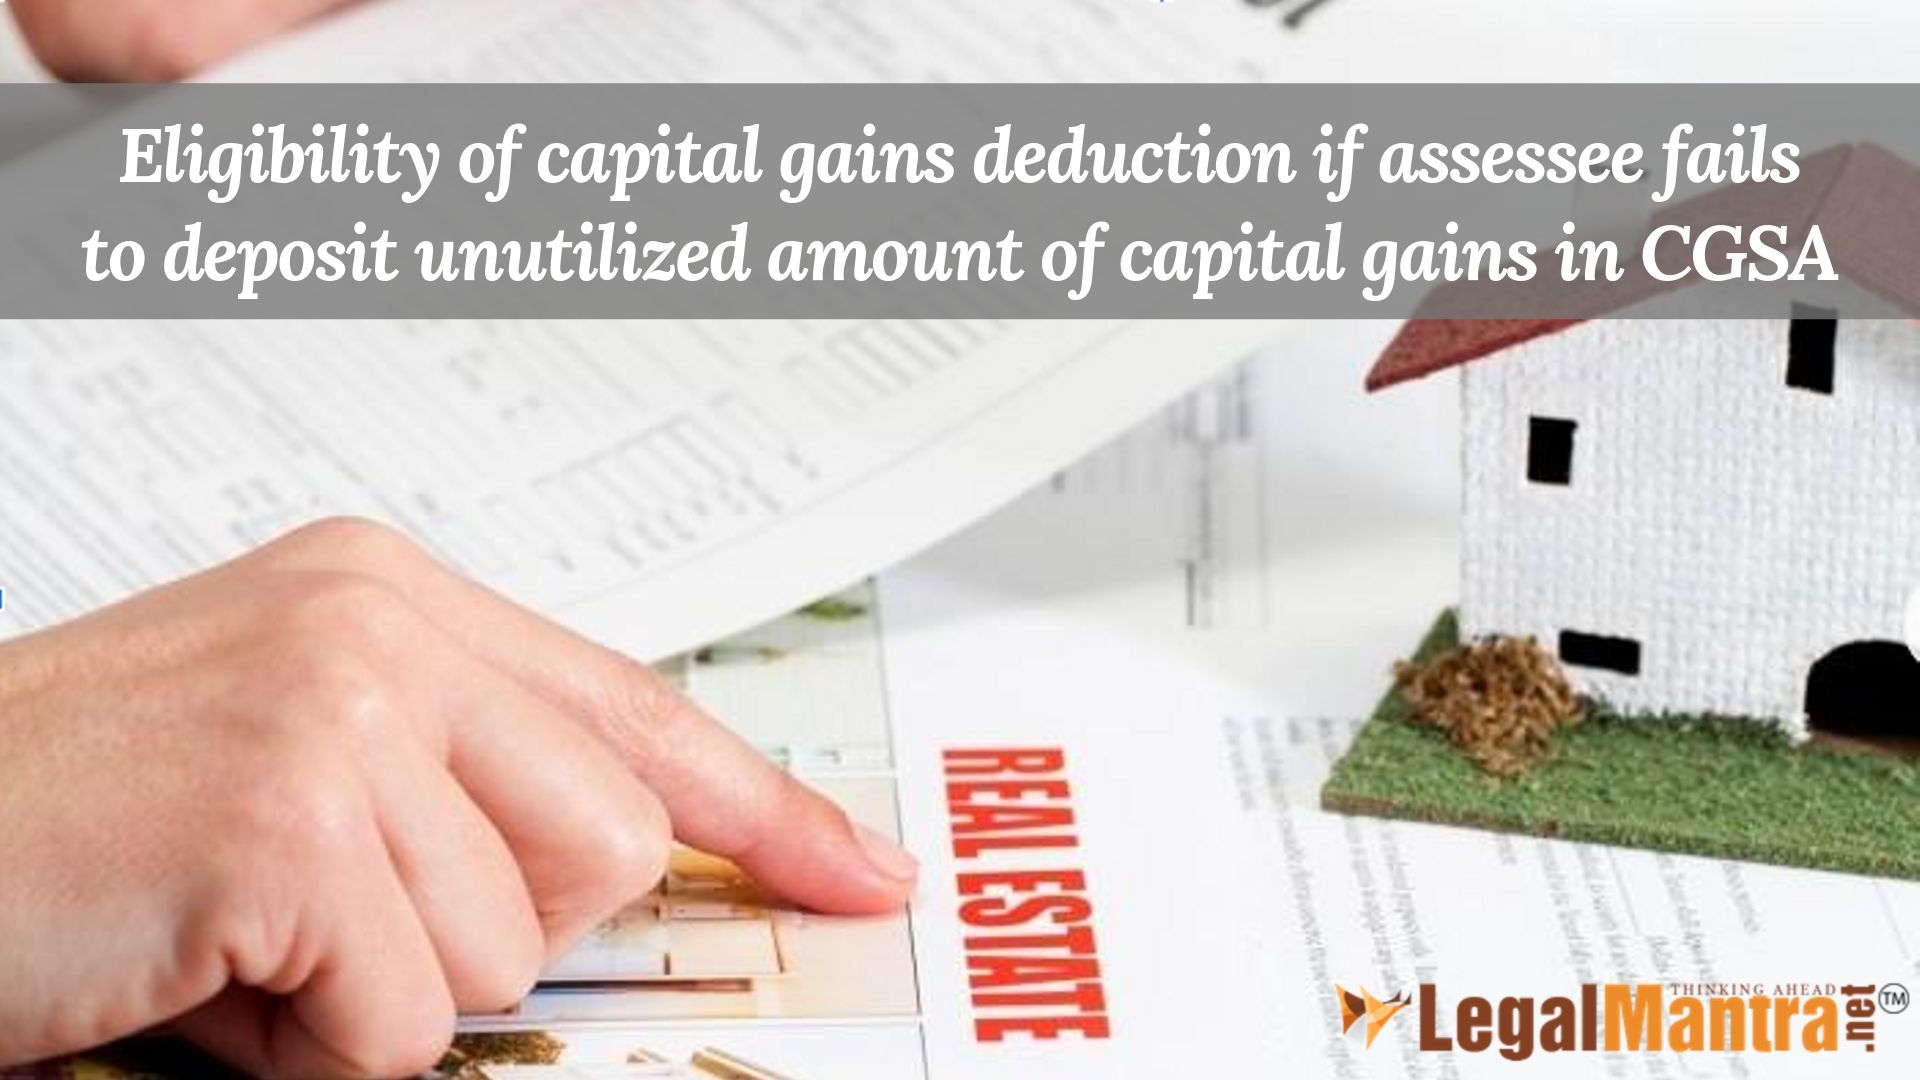 Eligibility of capital gains deduction if assessee failed to deposit unutilized amount of capital gains in capital gains scheme account by date of filing of return of income